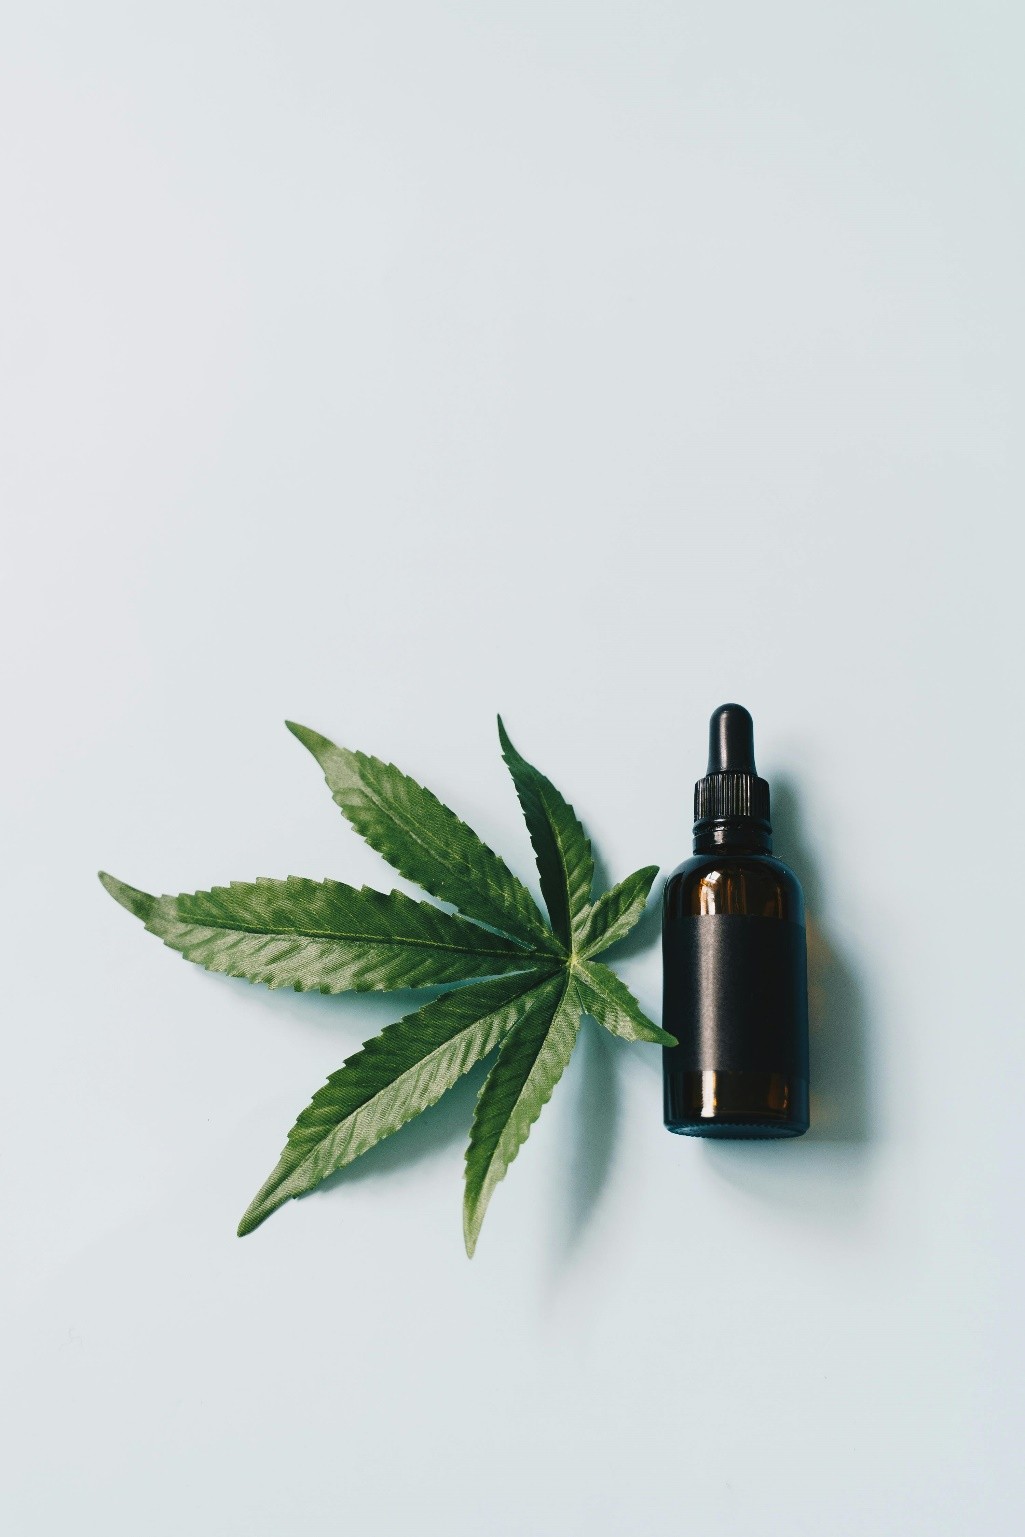 A leaf with a cannabis strain serum bottle on a white surface